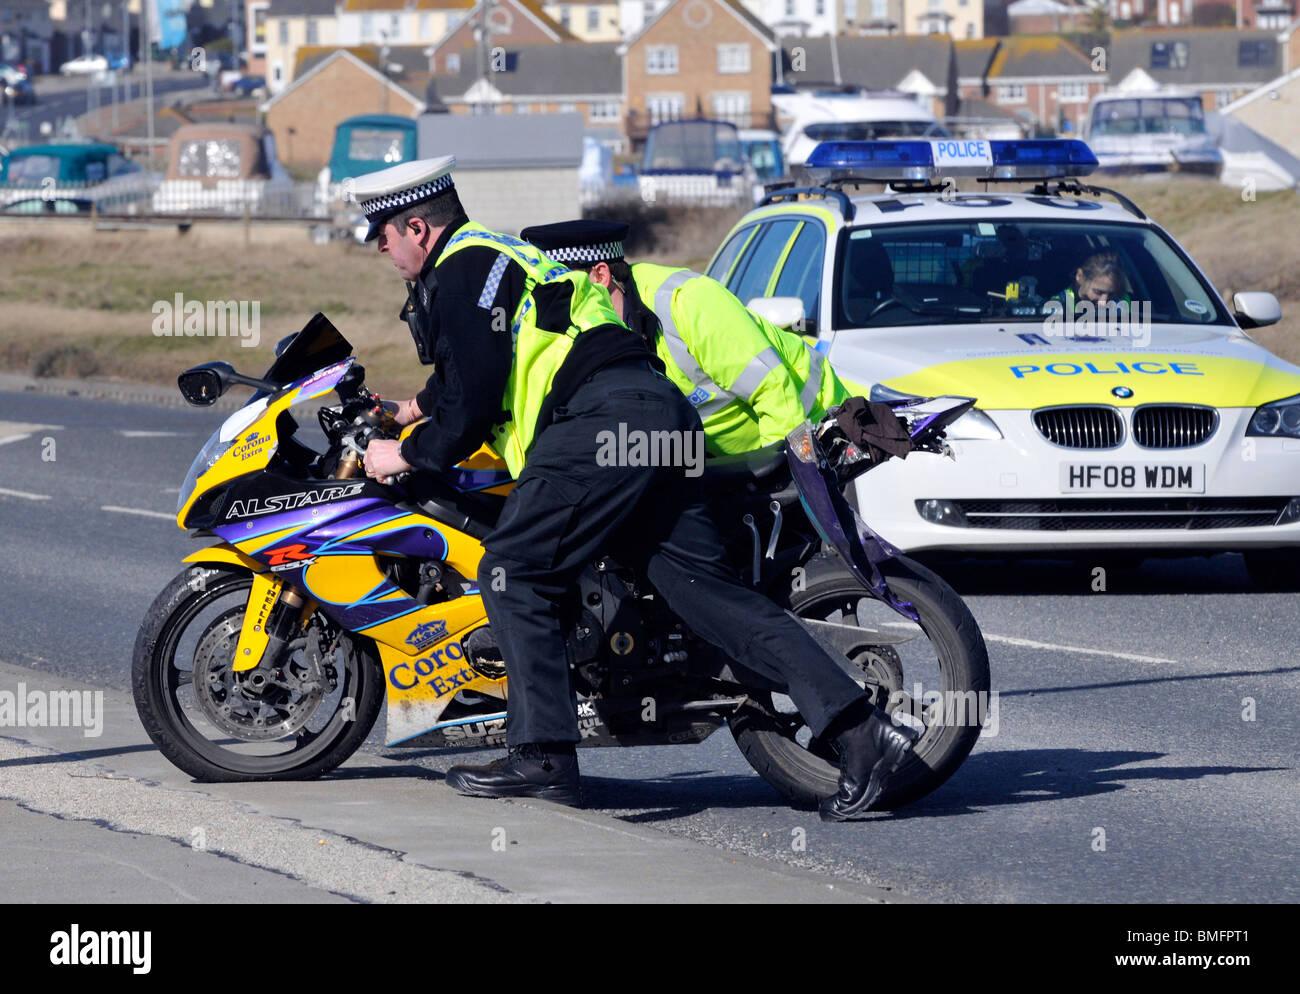 Motorcycle crash, police officers remove the wreckage of a crashed motorbike from the road, Britain, UK Stock Photo